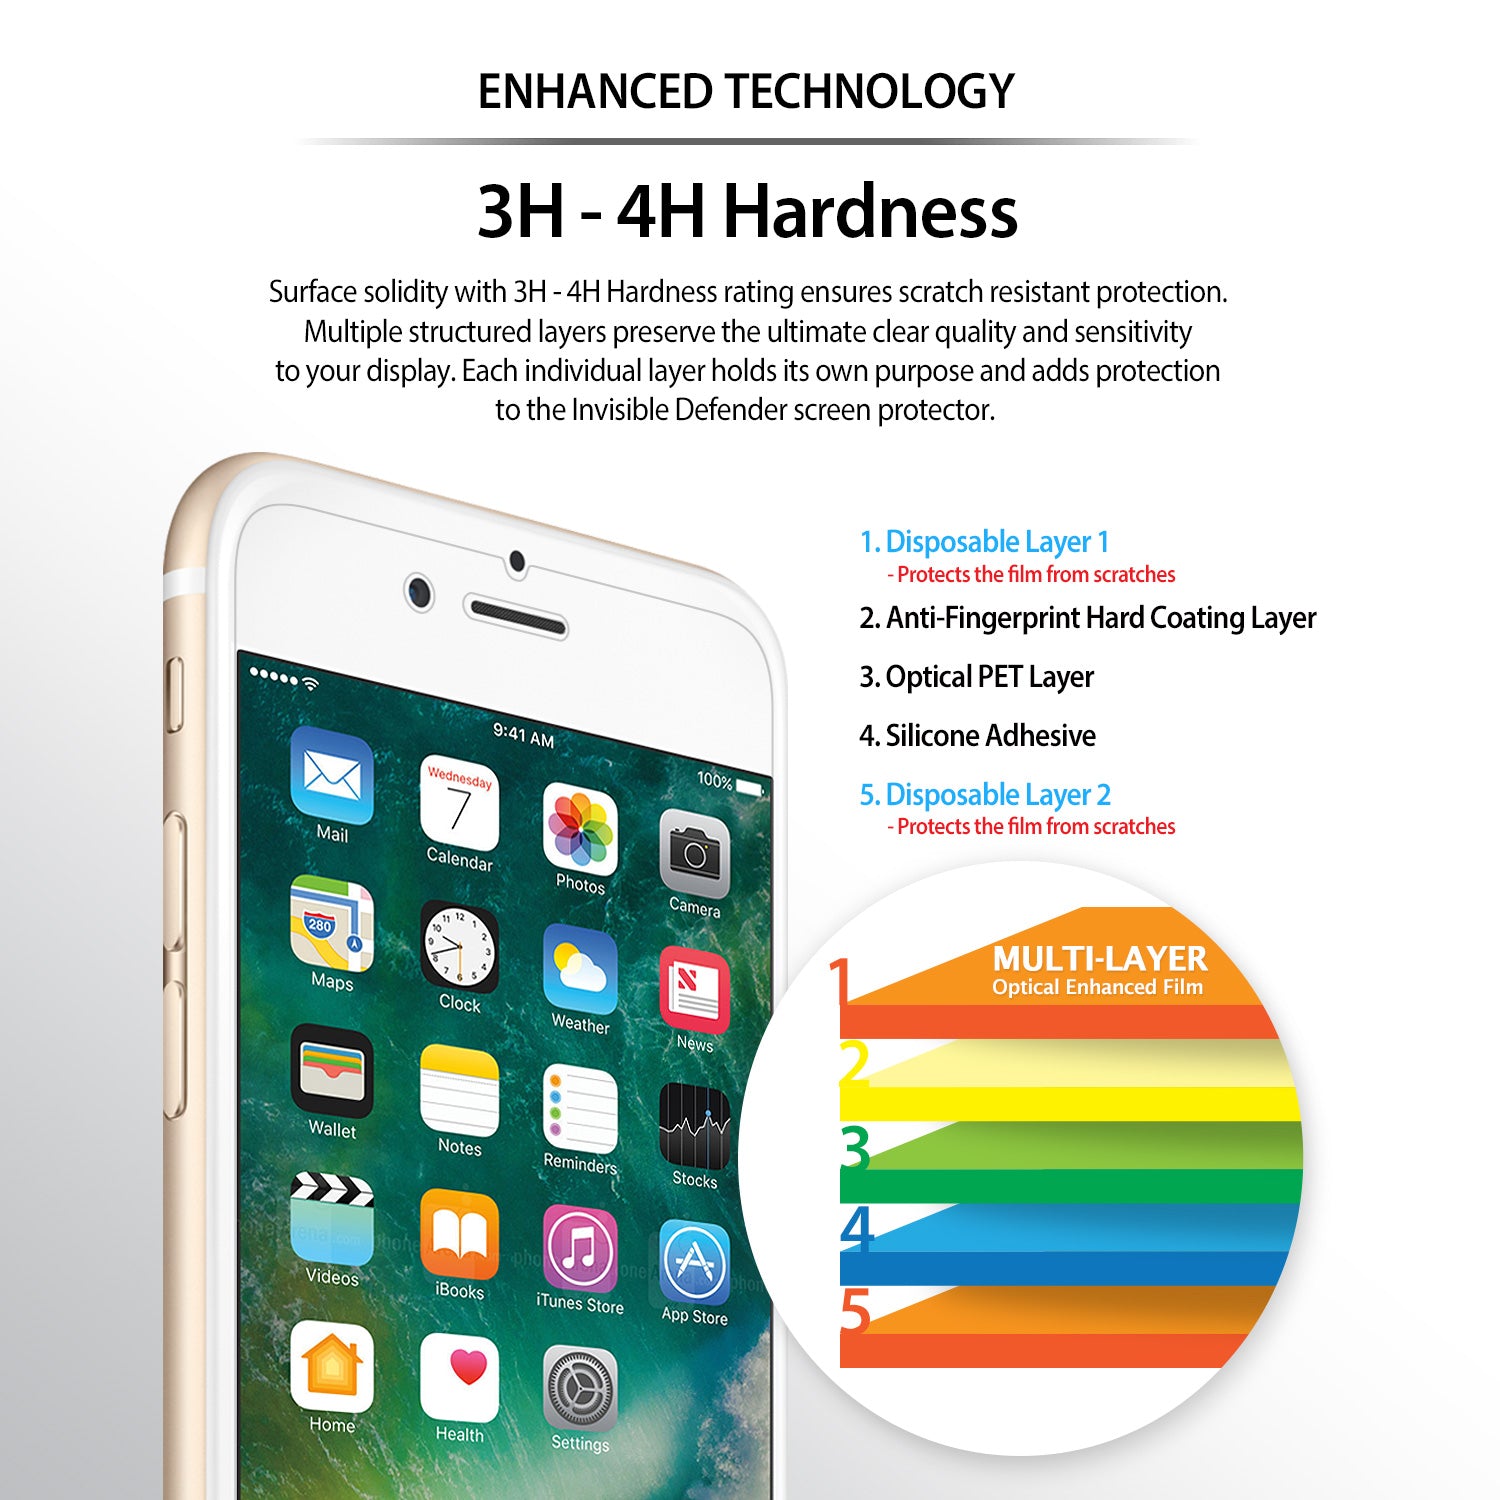 iPhone SE Screen Protector | Film (4P) - 3H - 4H Hardness. 